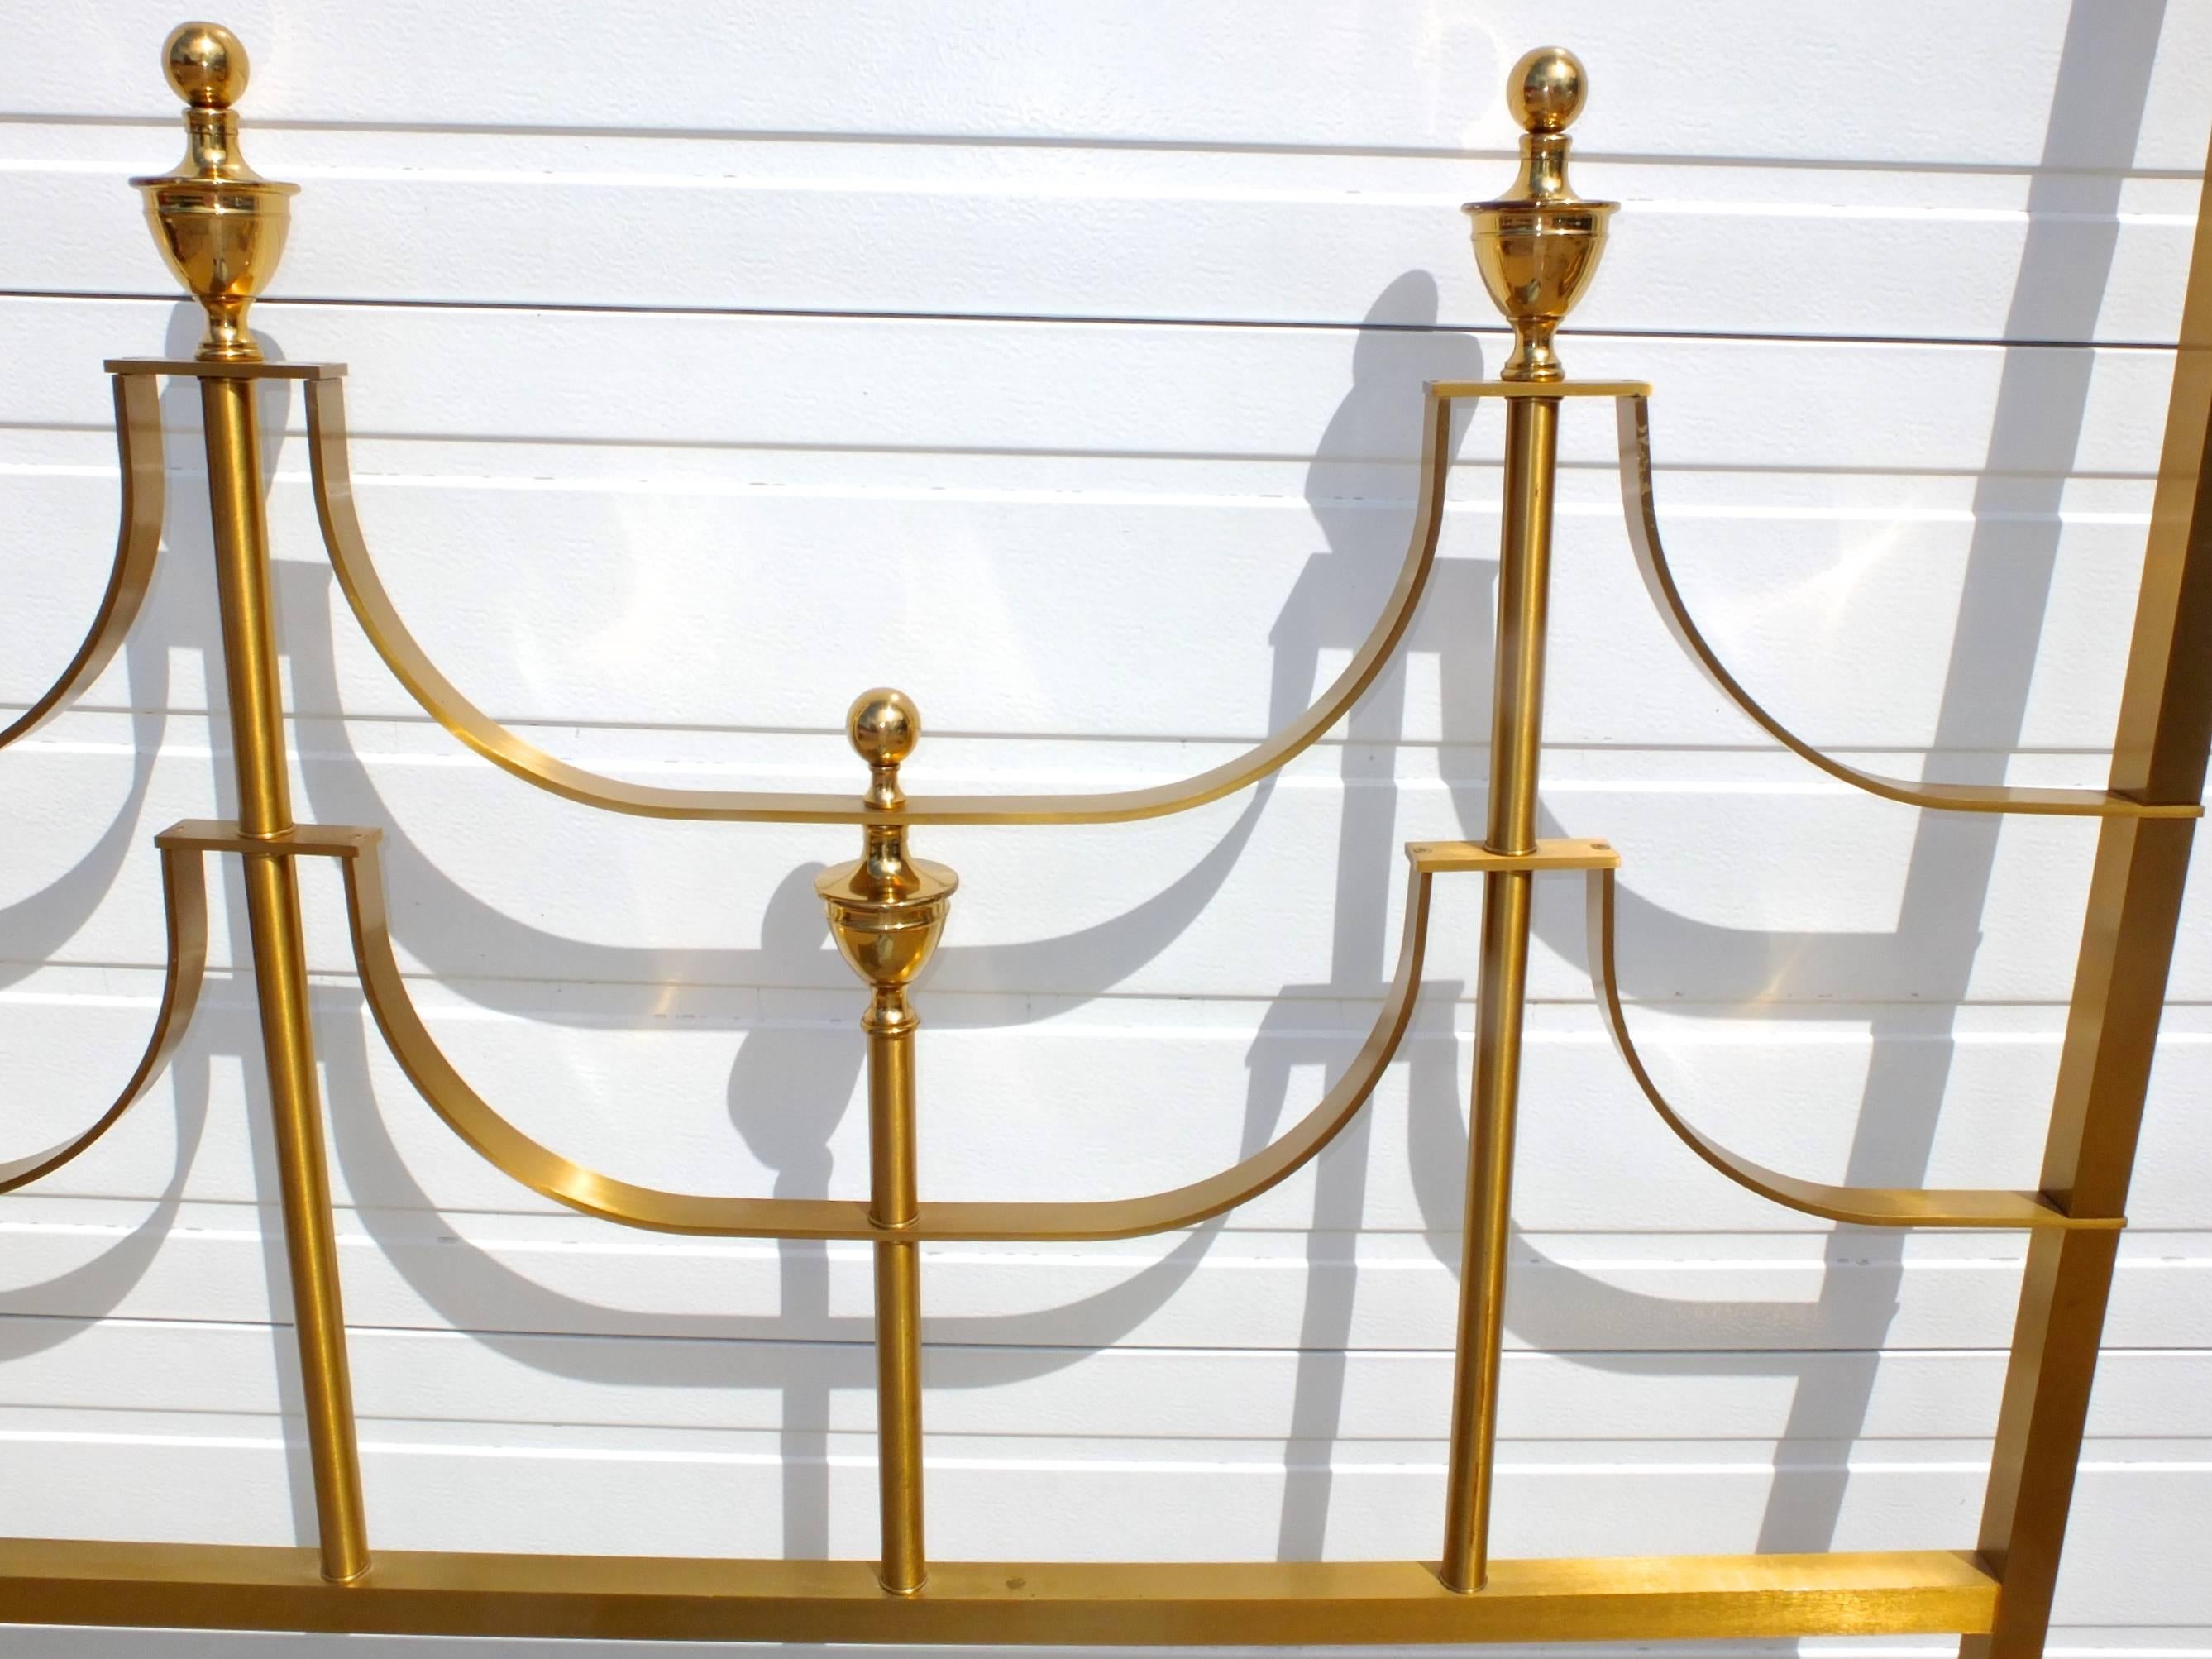 American Mastercraft King-Size Brass Headboard by Joseph Braswell and Inman Cook